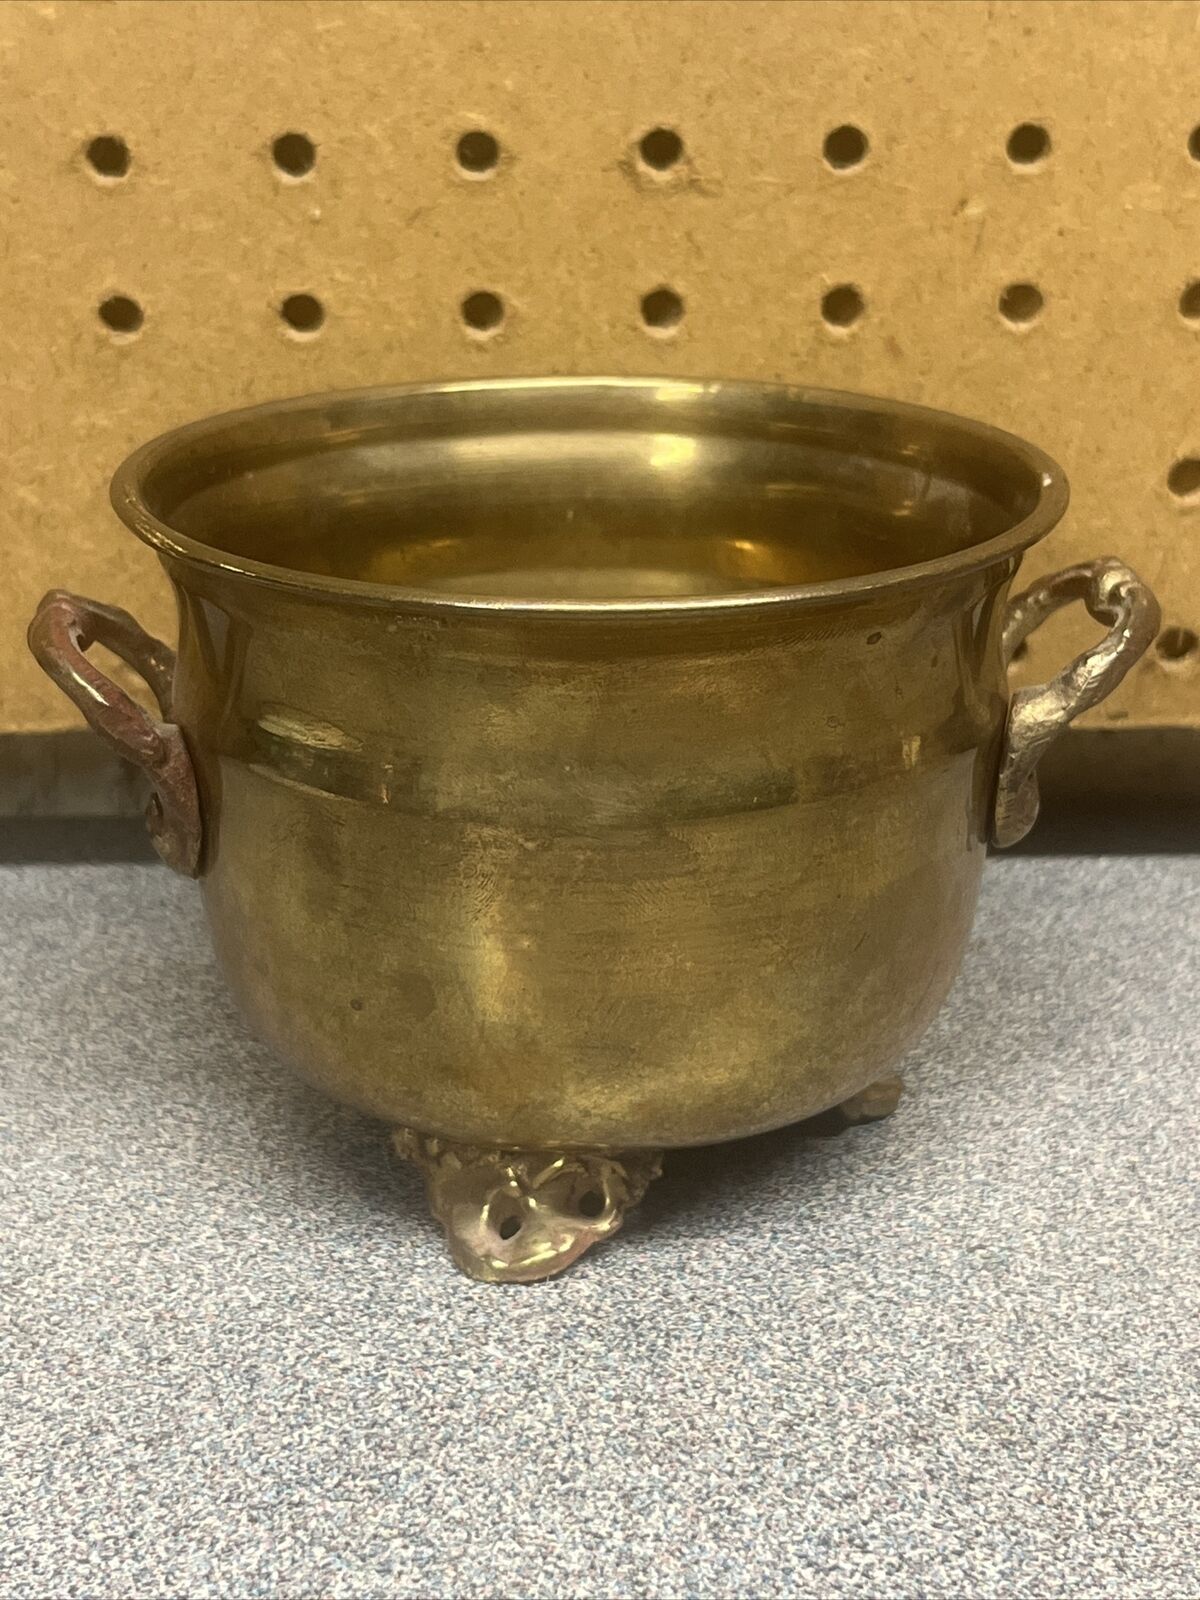 Vintage 3 Footed Brass Planter Pot w/Handles made in India